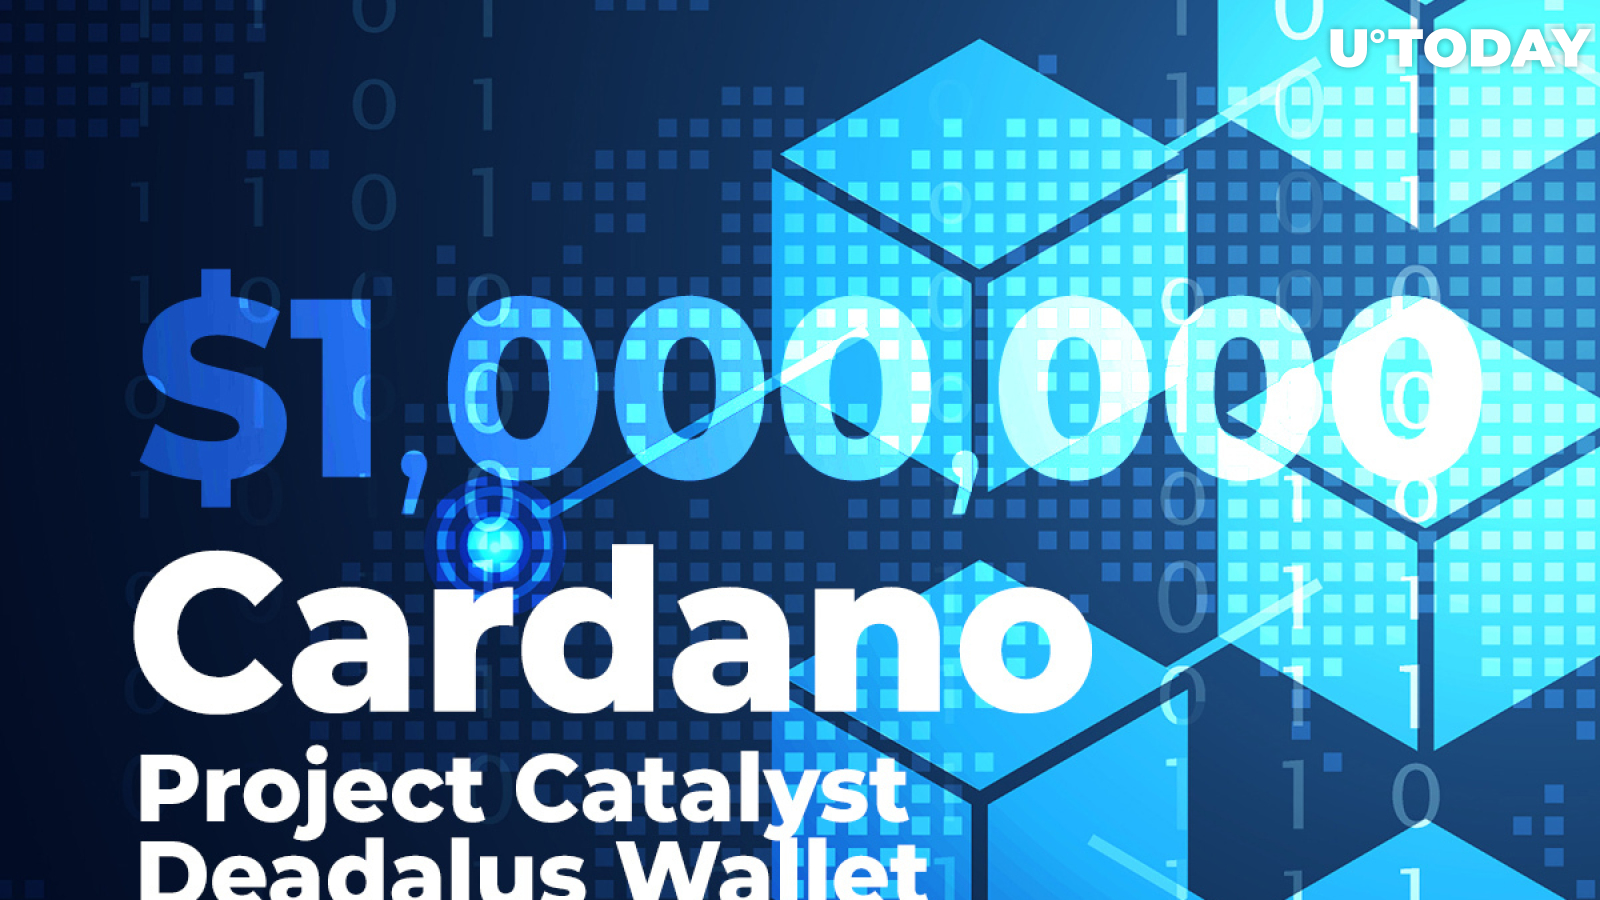 Cardano (ADA) Announces $1,000,000 Funding for Project Catalyst New Stage, Upgrades Daedalus Wallet